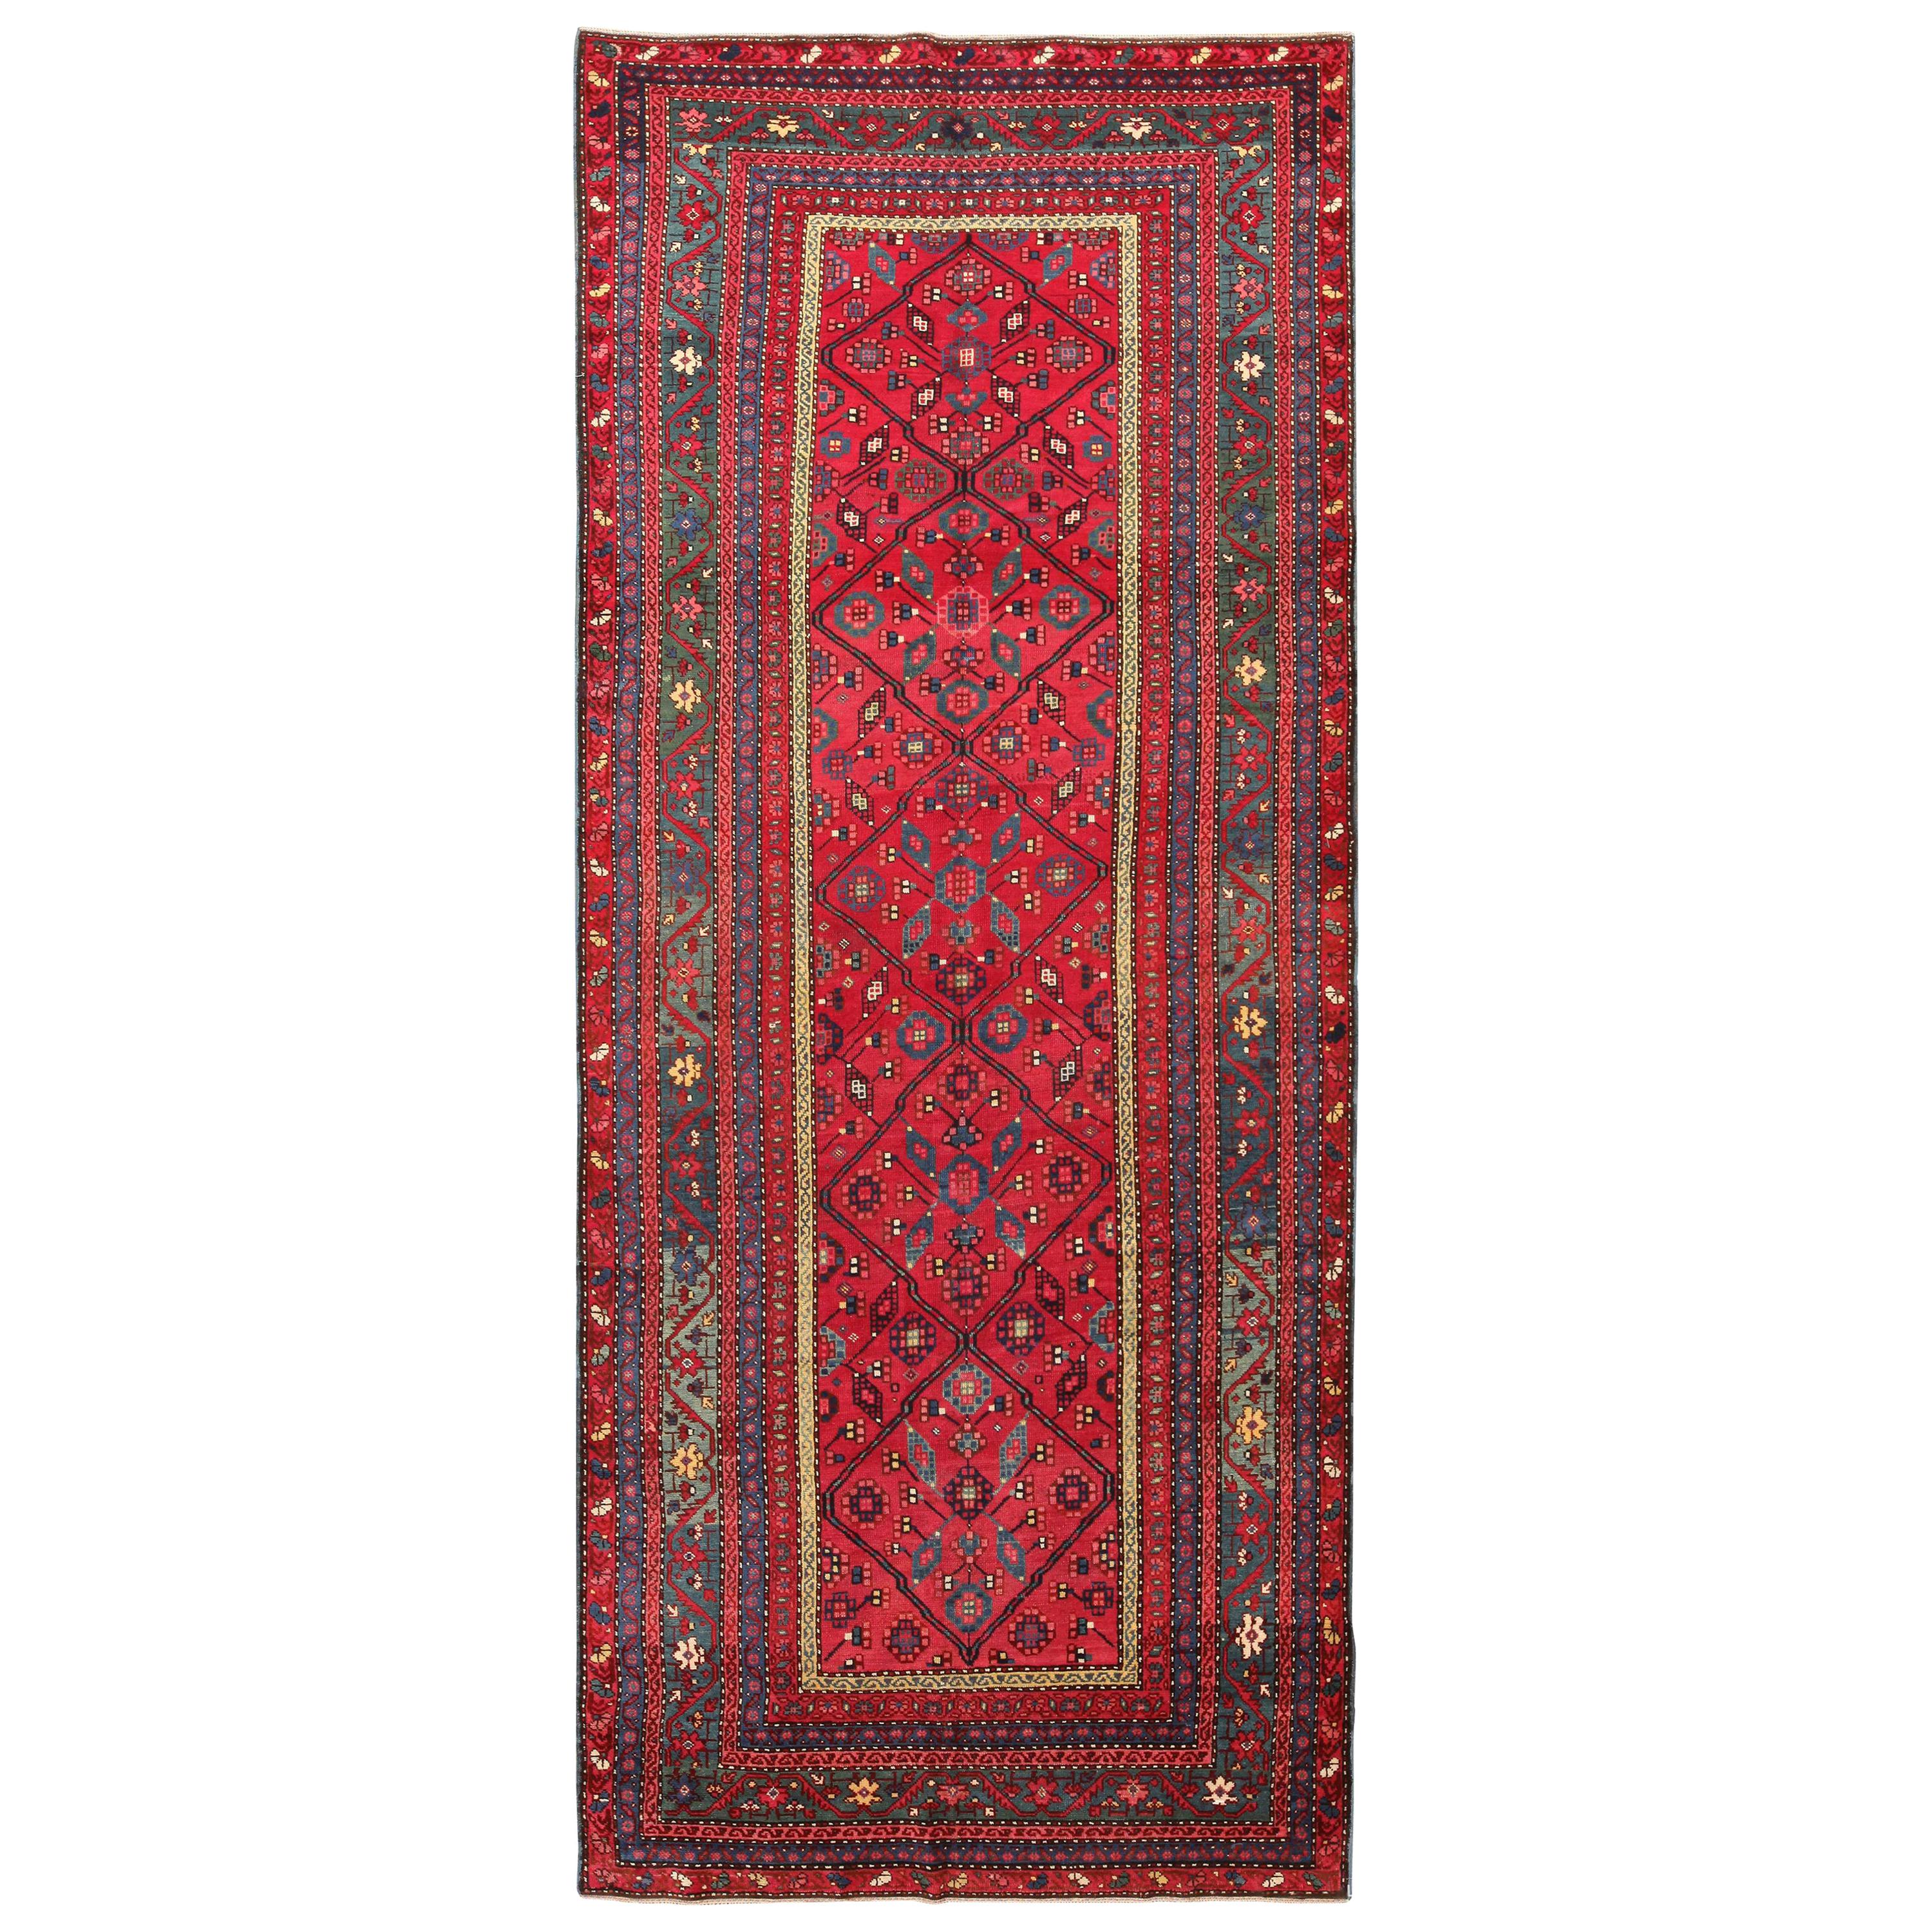 Nazmiyal Collection Antique Caucasian Karabagh Rug. Size: 4 ft 8 in x 11 ft